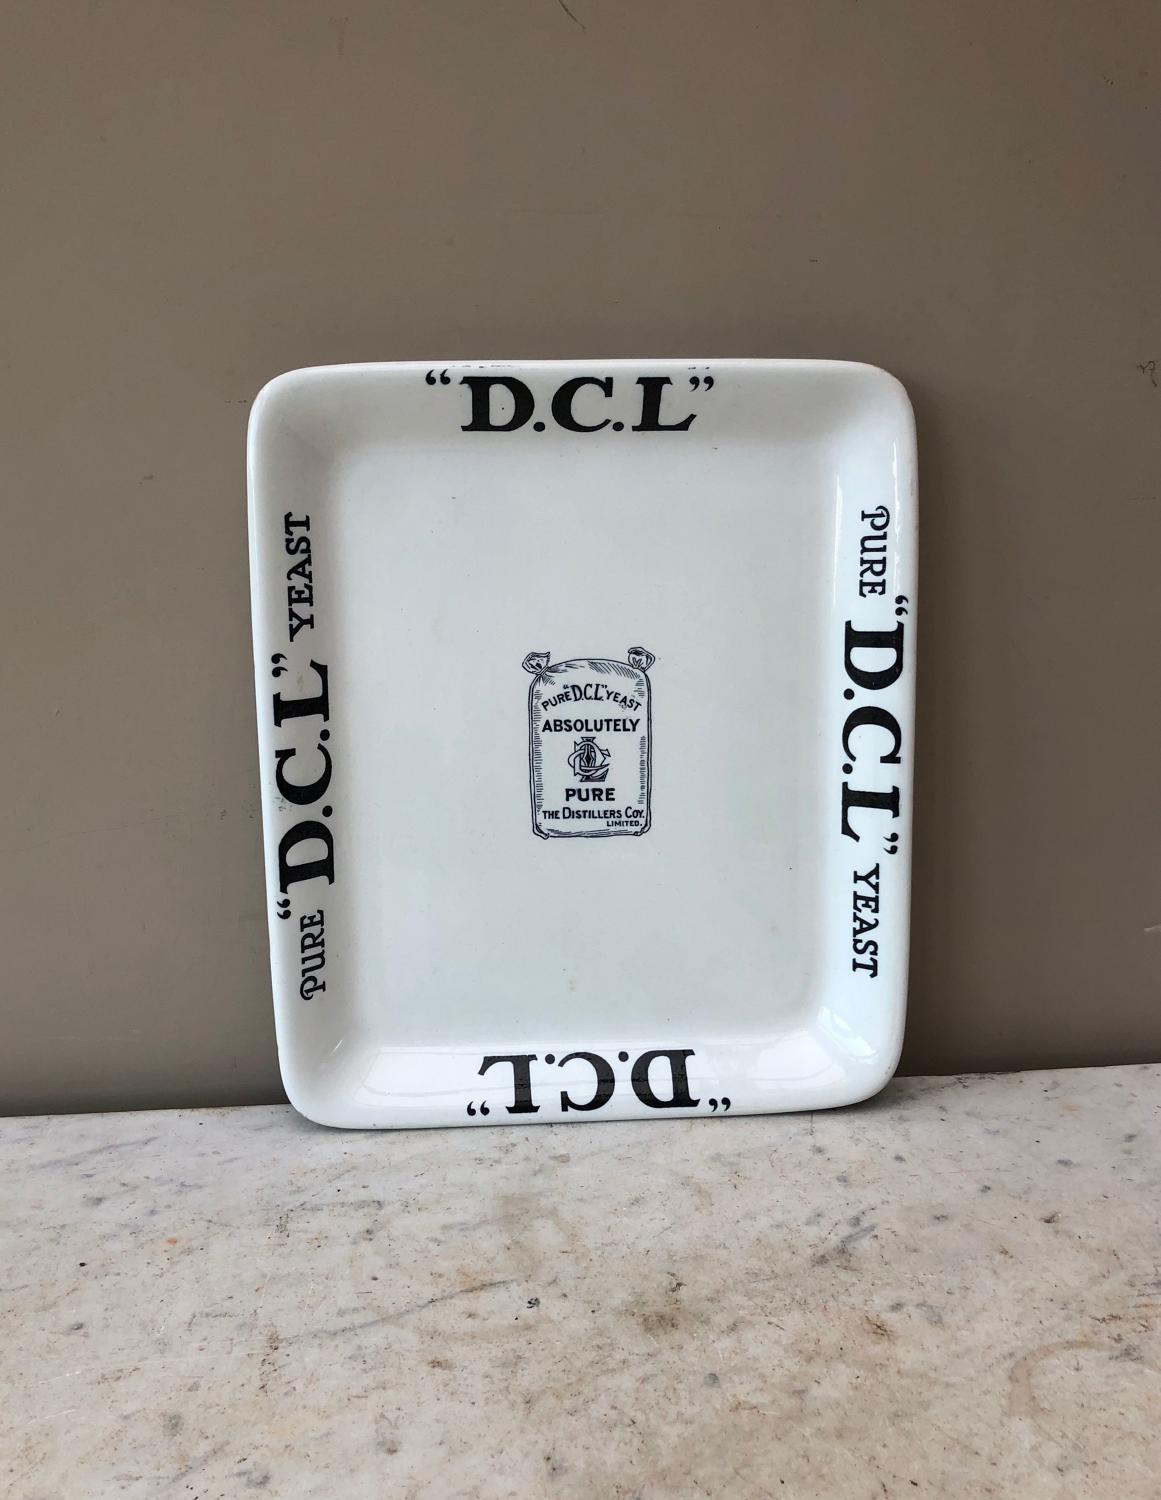 Edwardian Shops Advertising Display Plate - DCL Yeast